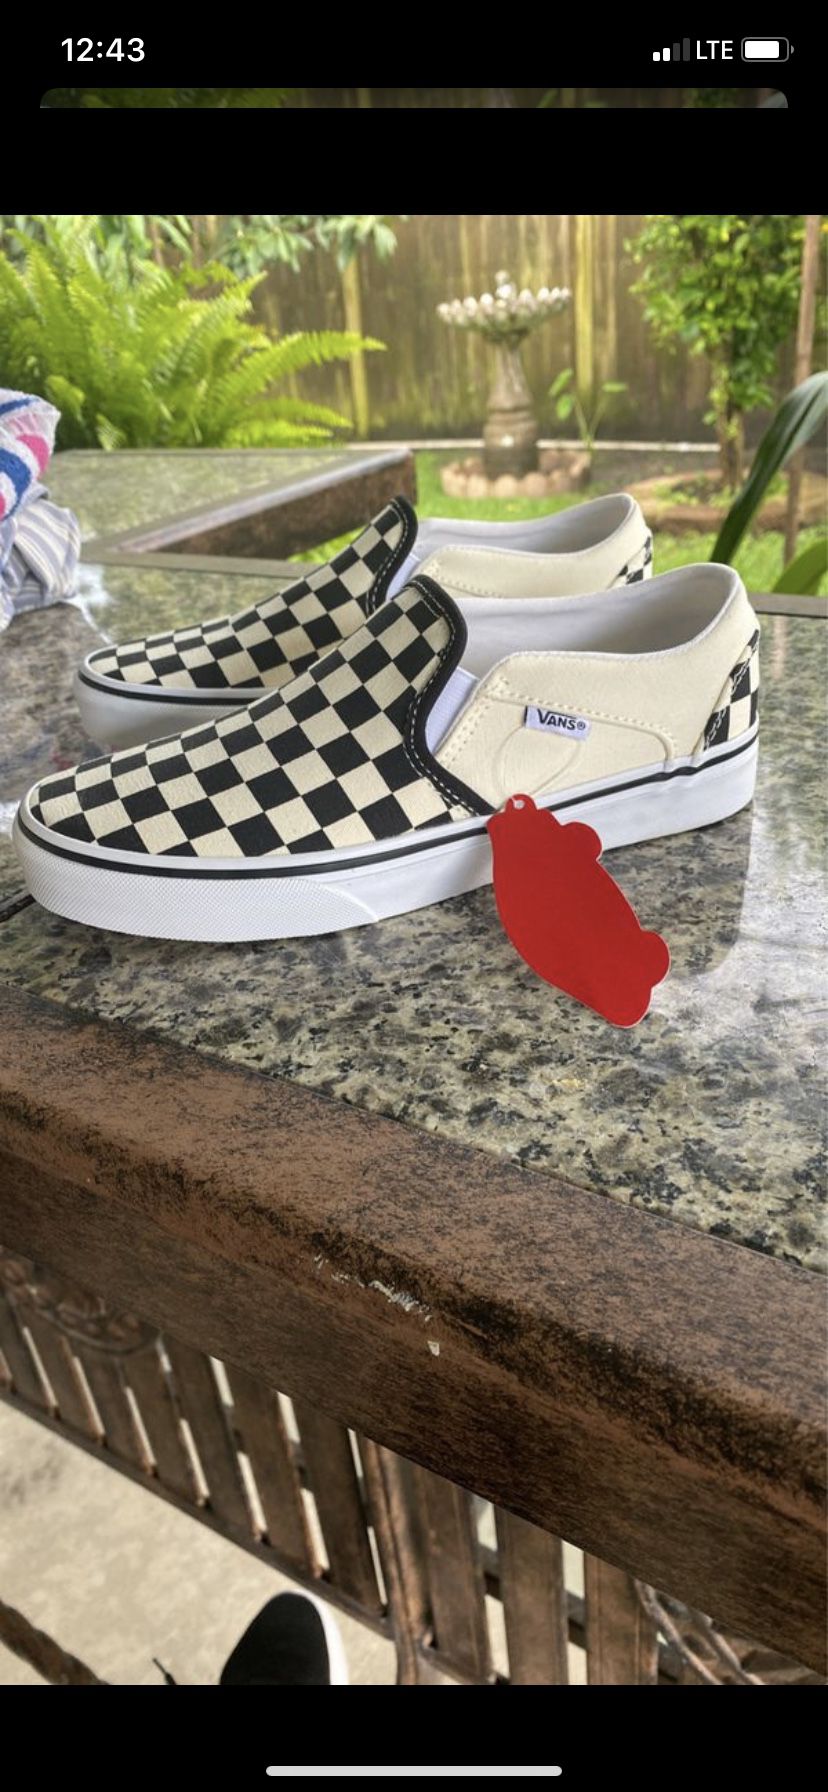 New vans for women only serious people interested text firm on price